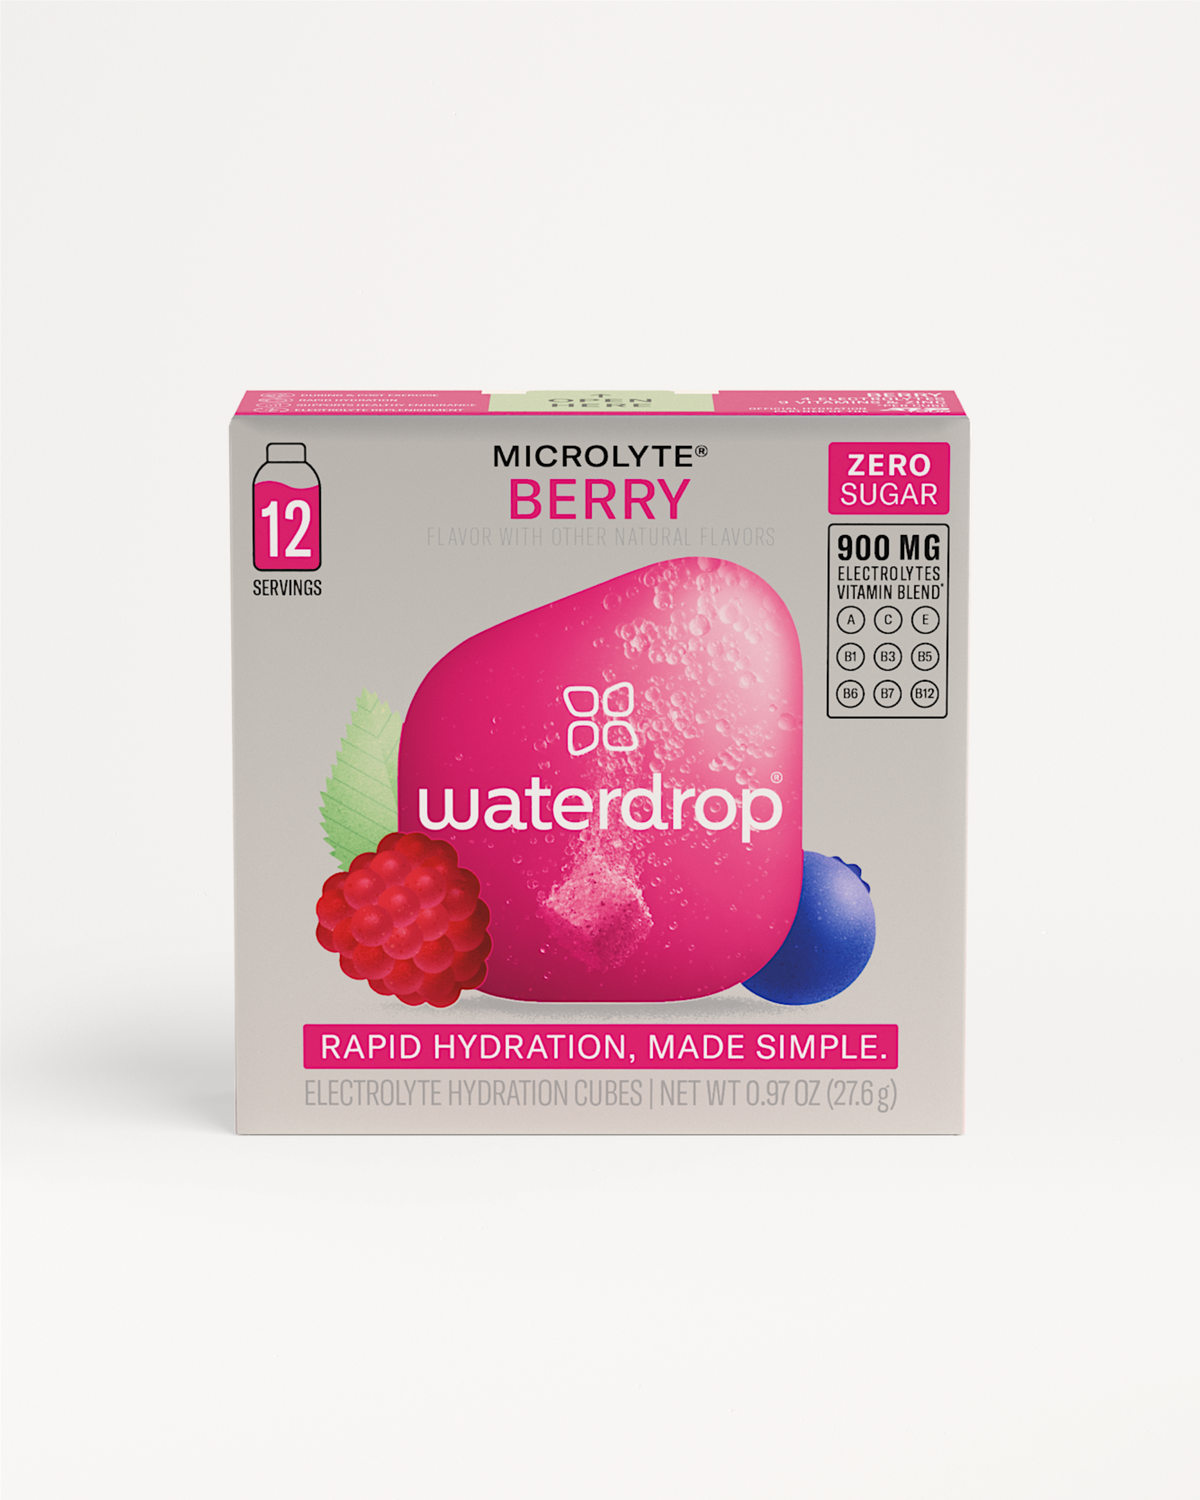 Microlyte BERRY with electrolytes: Order now | waterdrop®